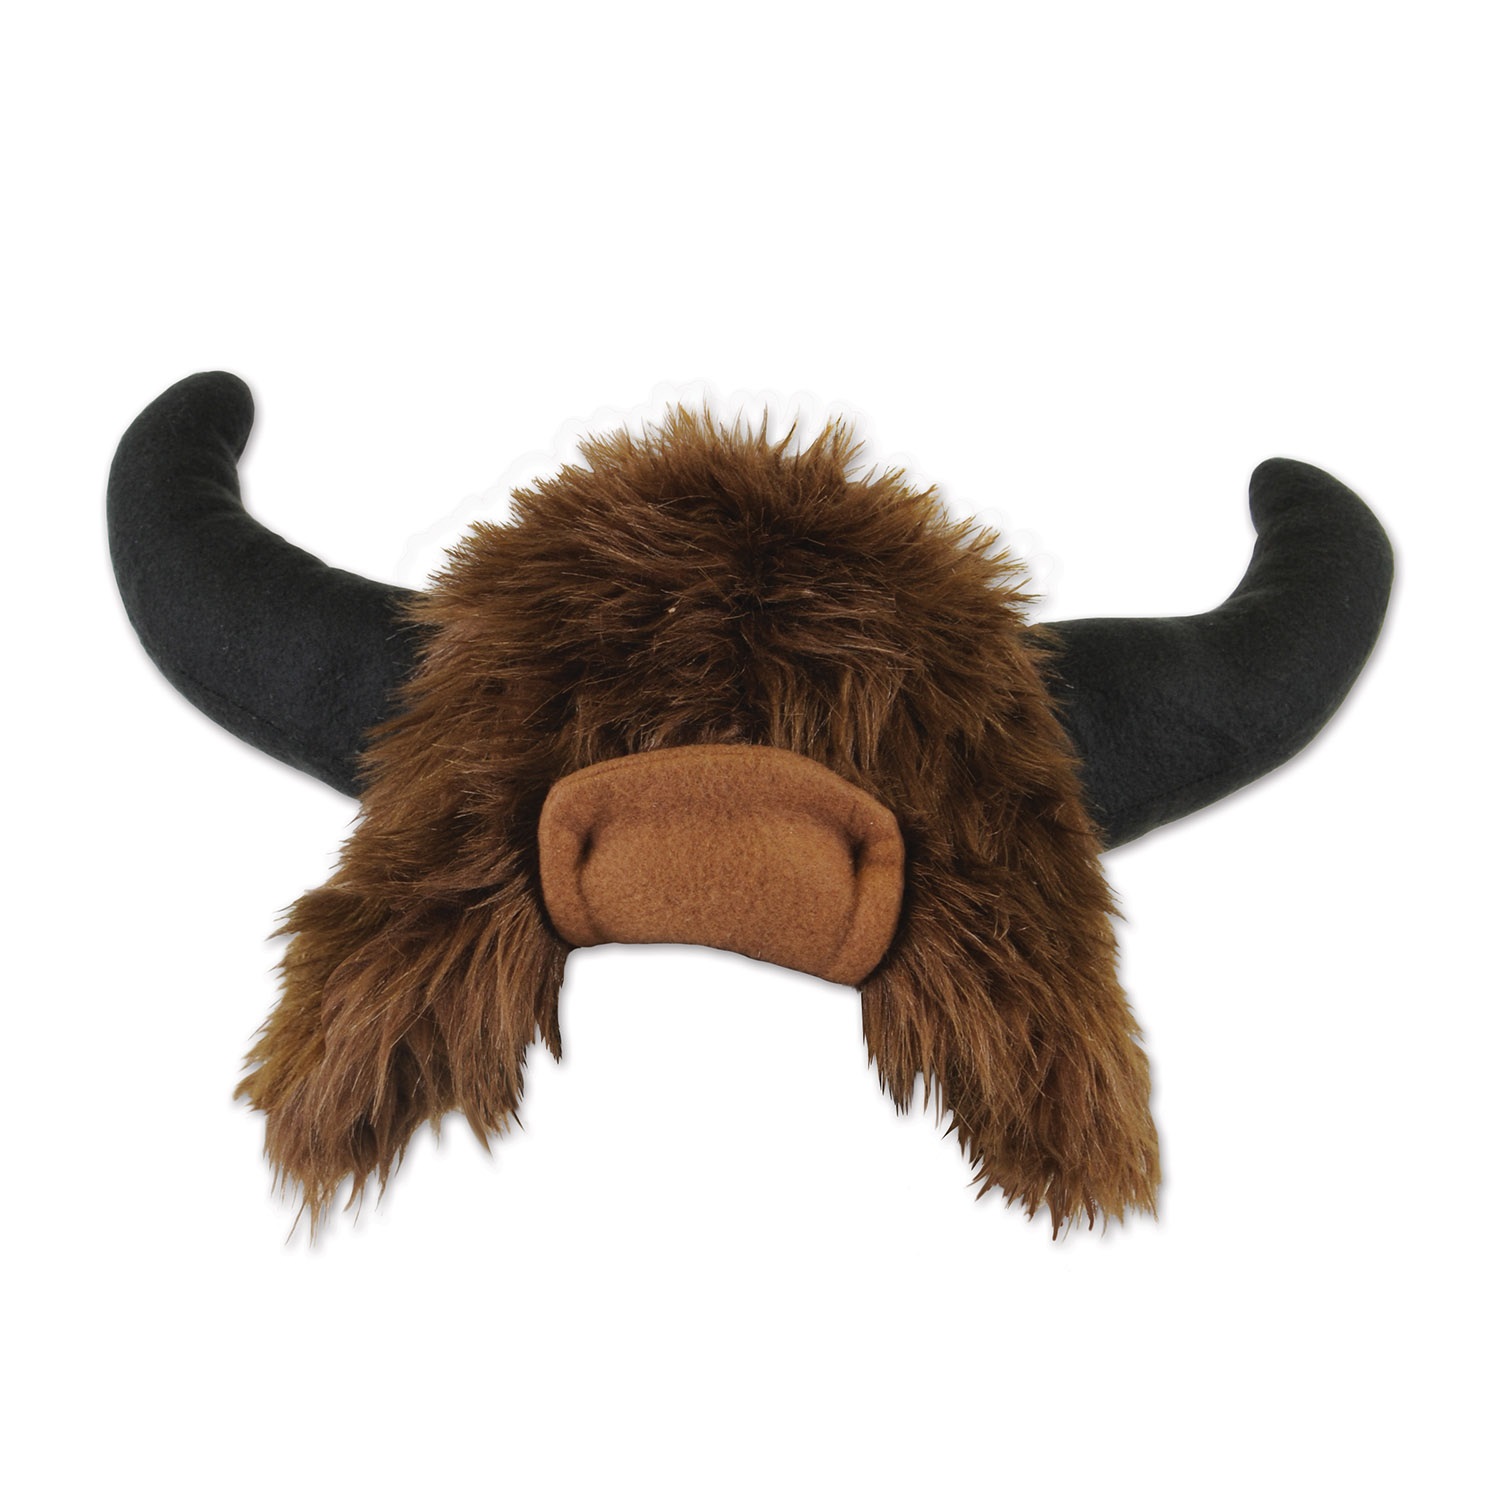 Beistle Pack of 6 Plush Black and Brown Buffalo Lodge Style Hat Costume